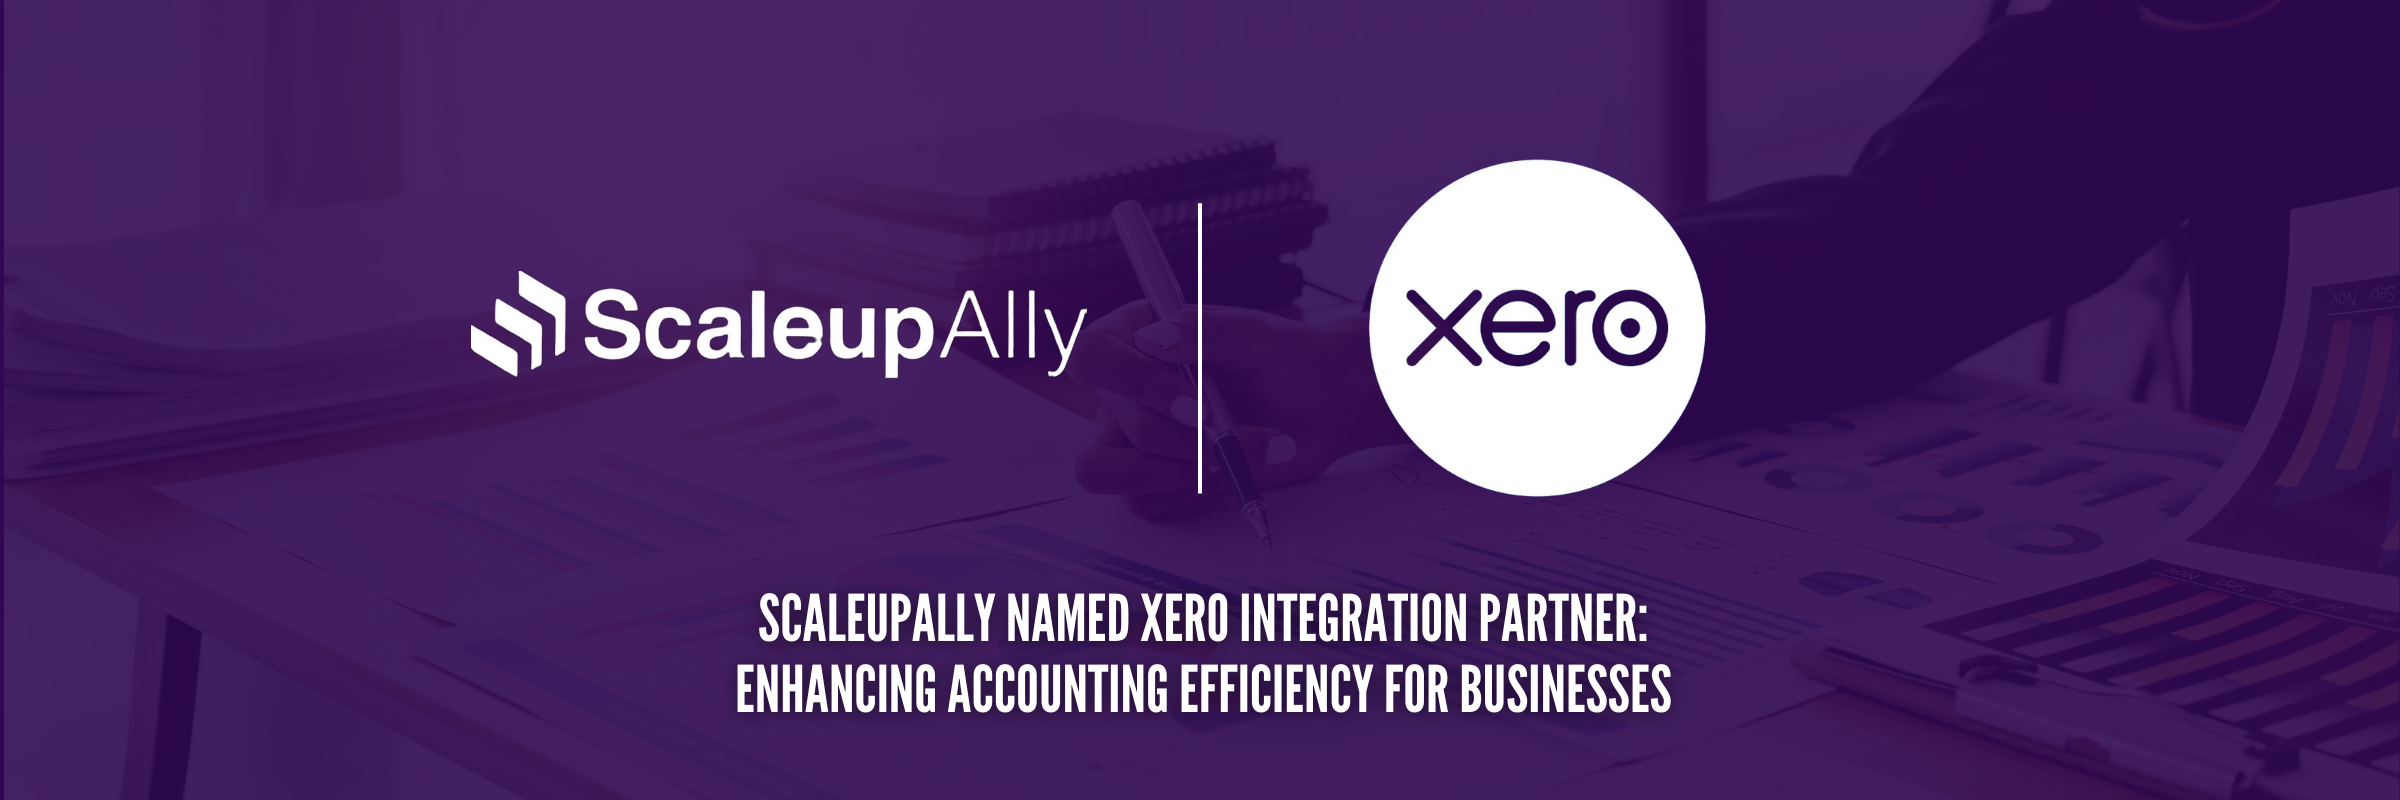 ScaleupAlly Named Xero Integration Partner: Enhancing Accounting Efficiency for Businesses